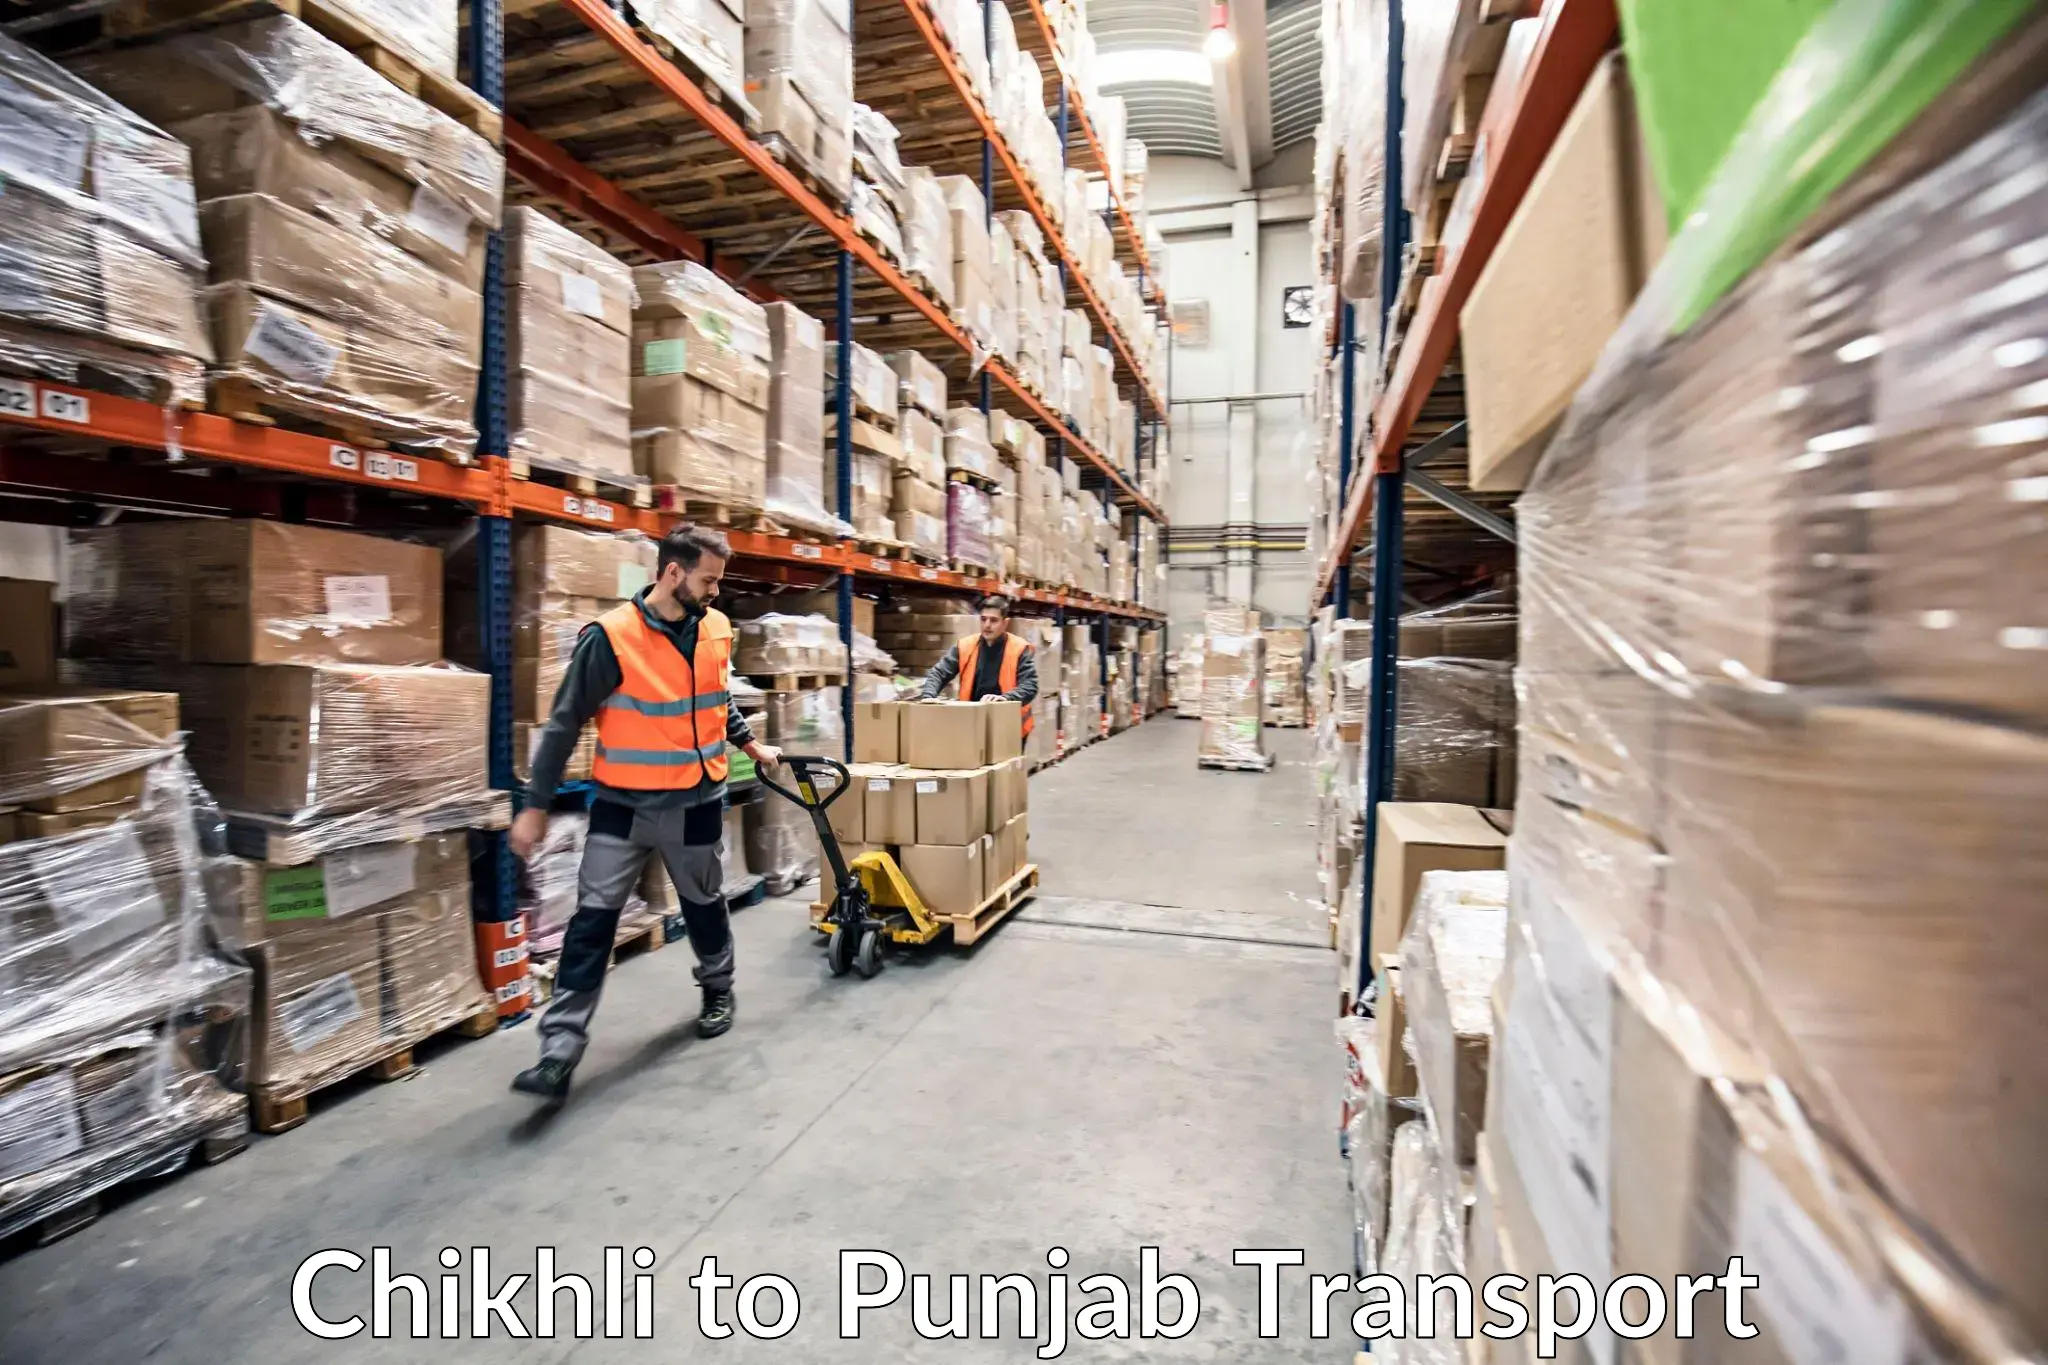 Truck transport companies in India Chikhli to Pathankot